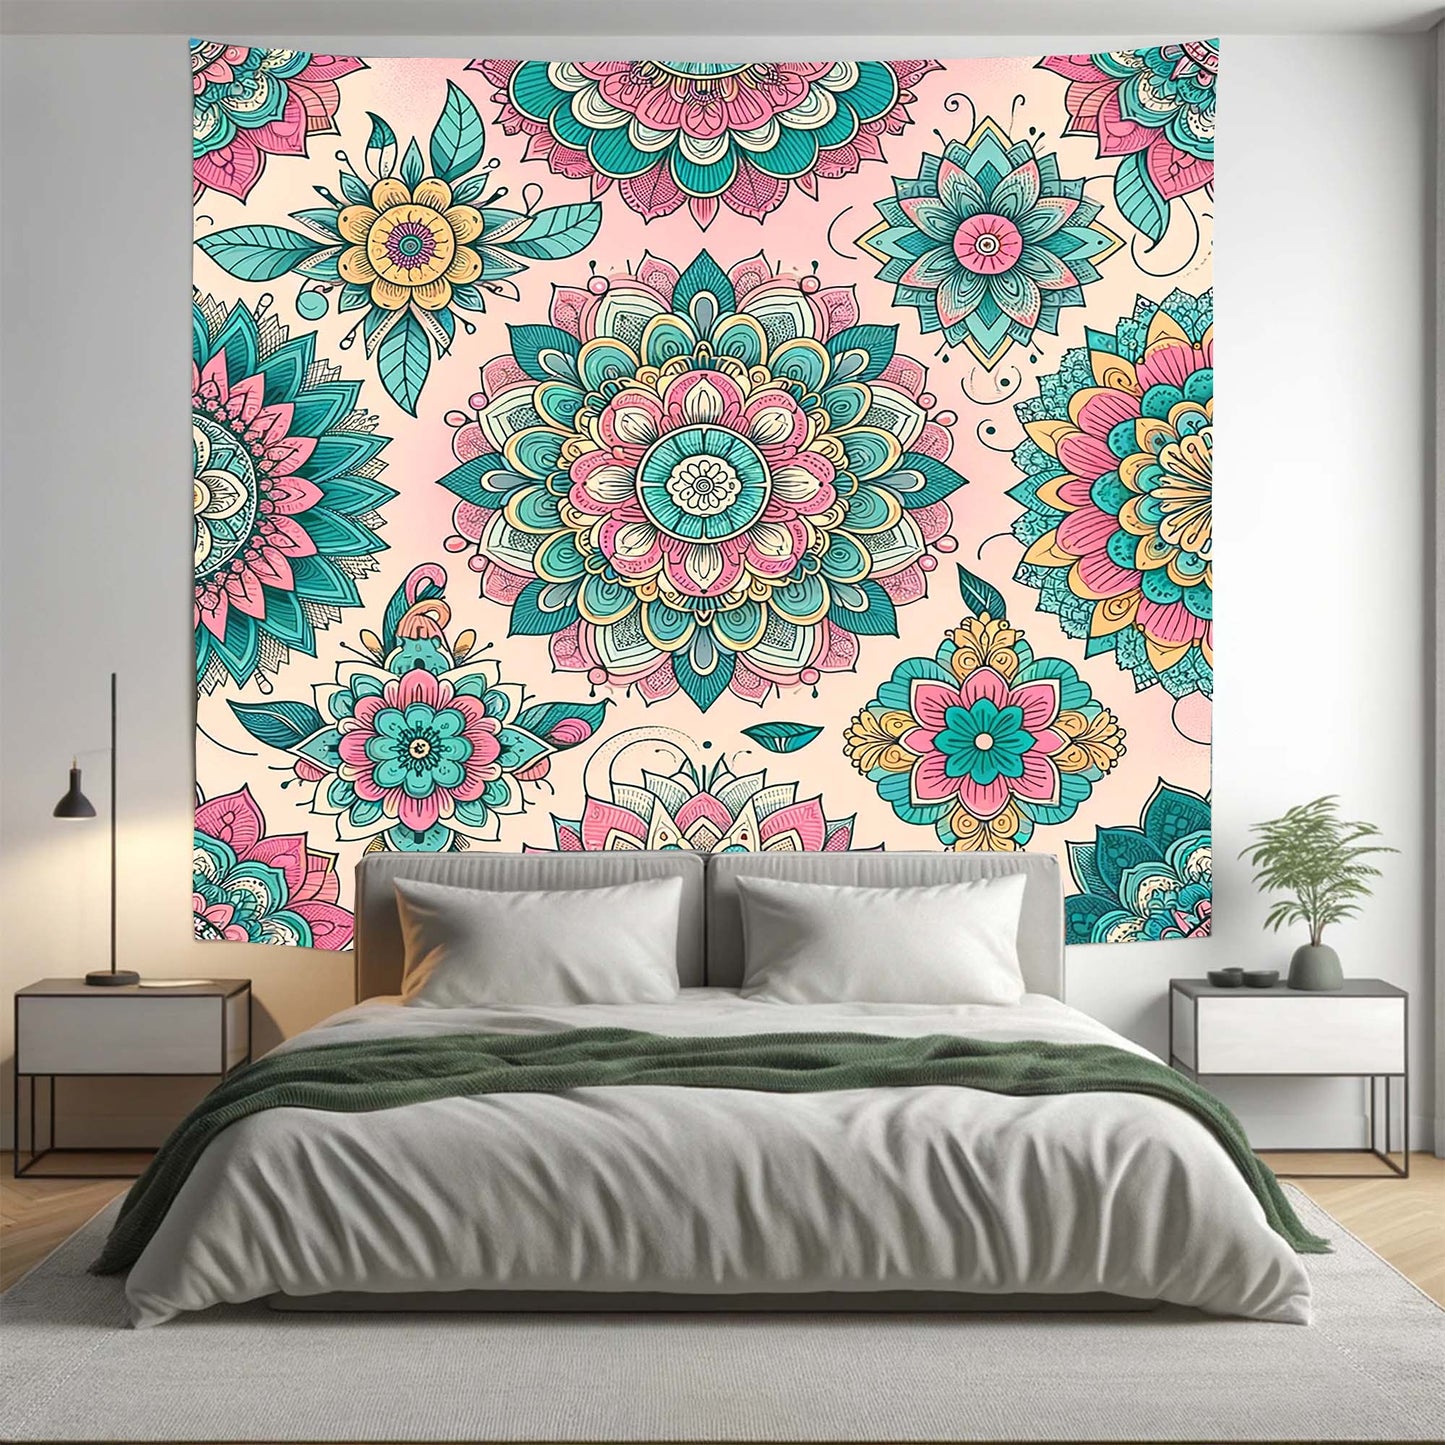 Bohemian Teal Beige Floral Mandala Tapestry Psychedelic Wall Hanging Boho Decor